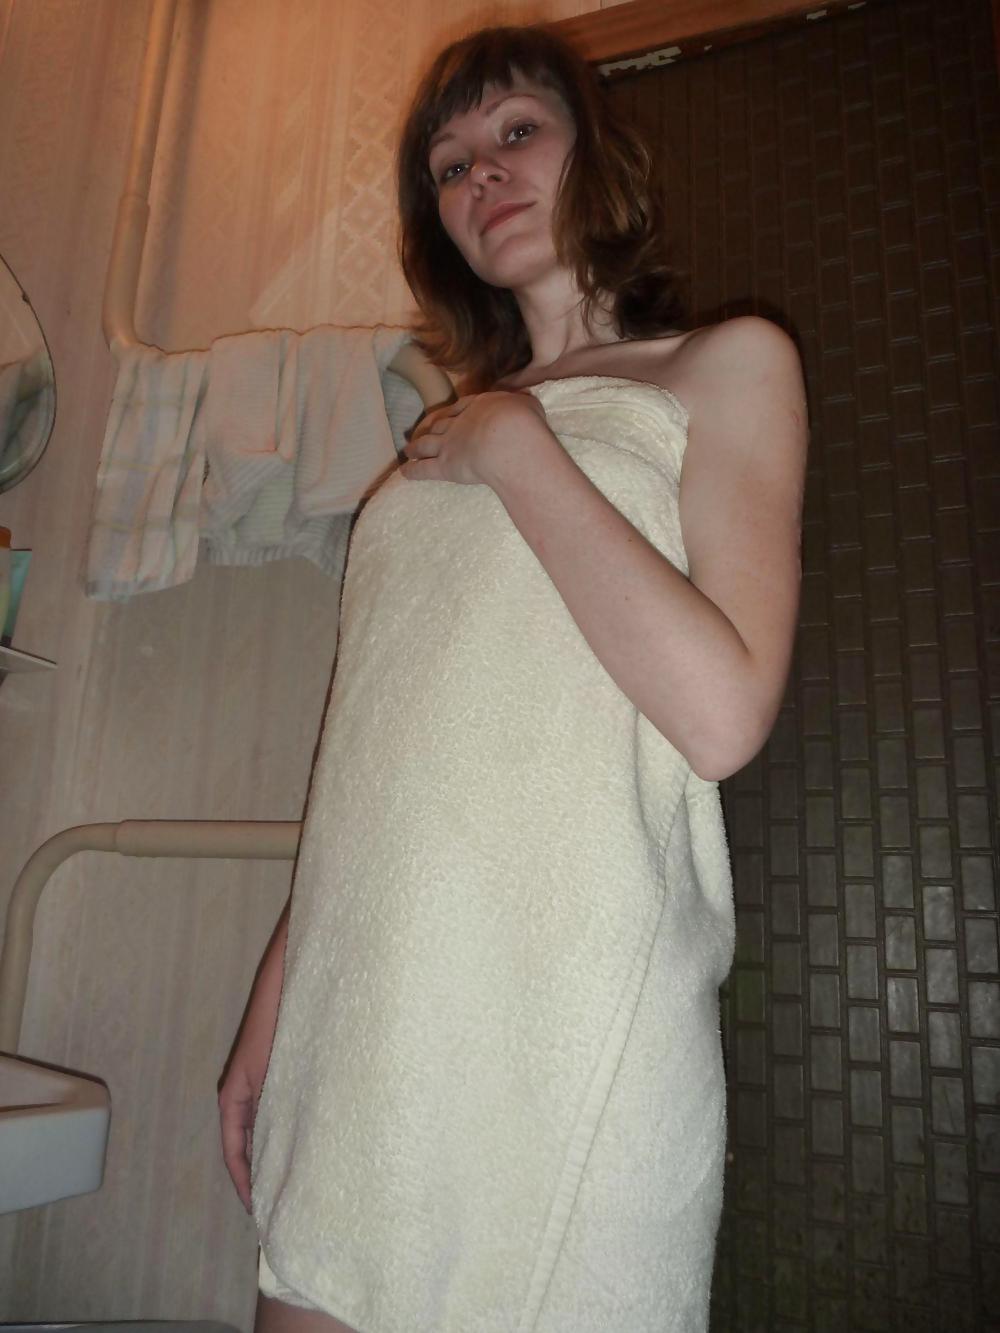 SWEET RUSSIAN GIRL IV adult photos